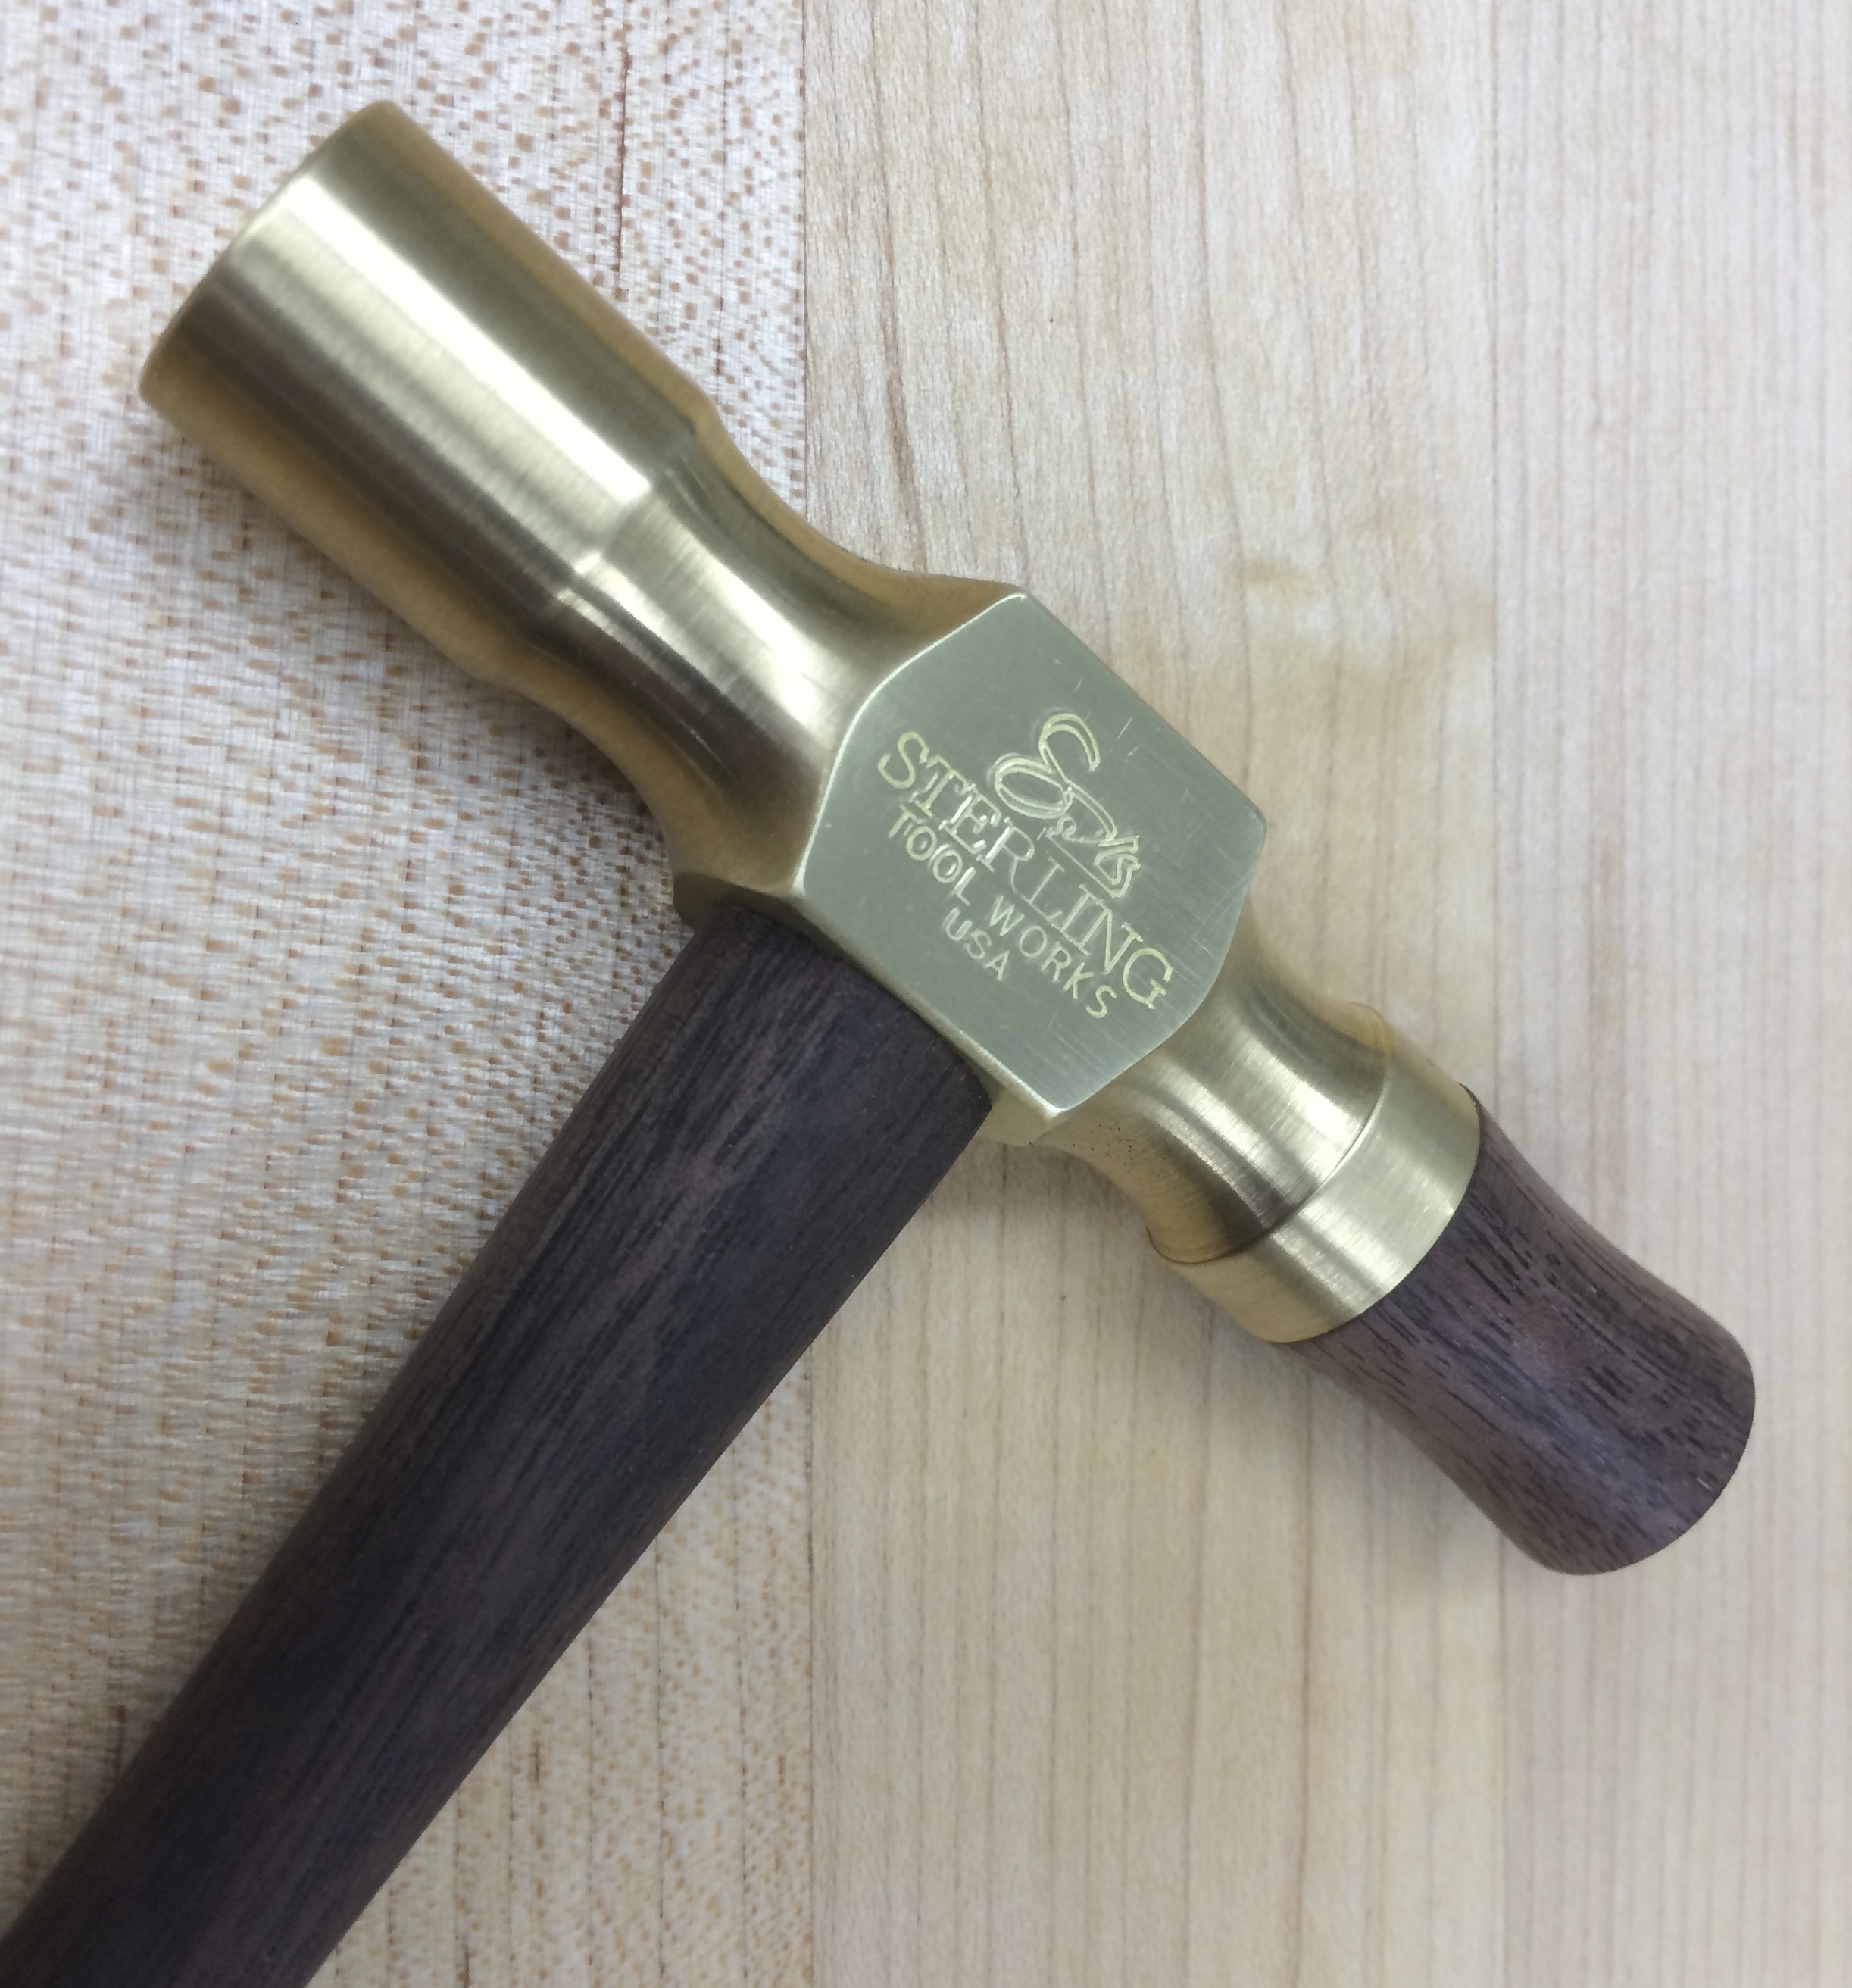 Announcing the Sterling Tool Works Plane Hammer